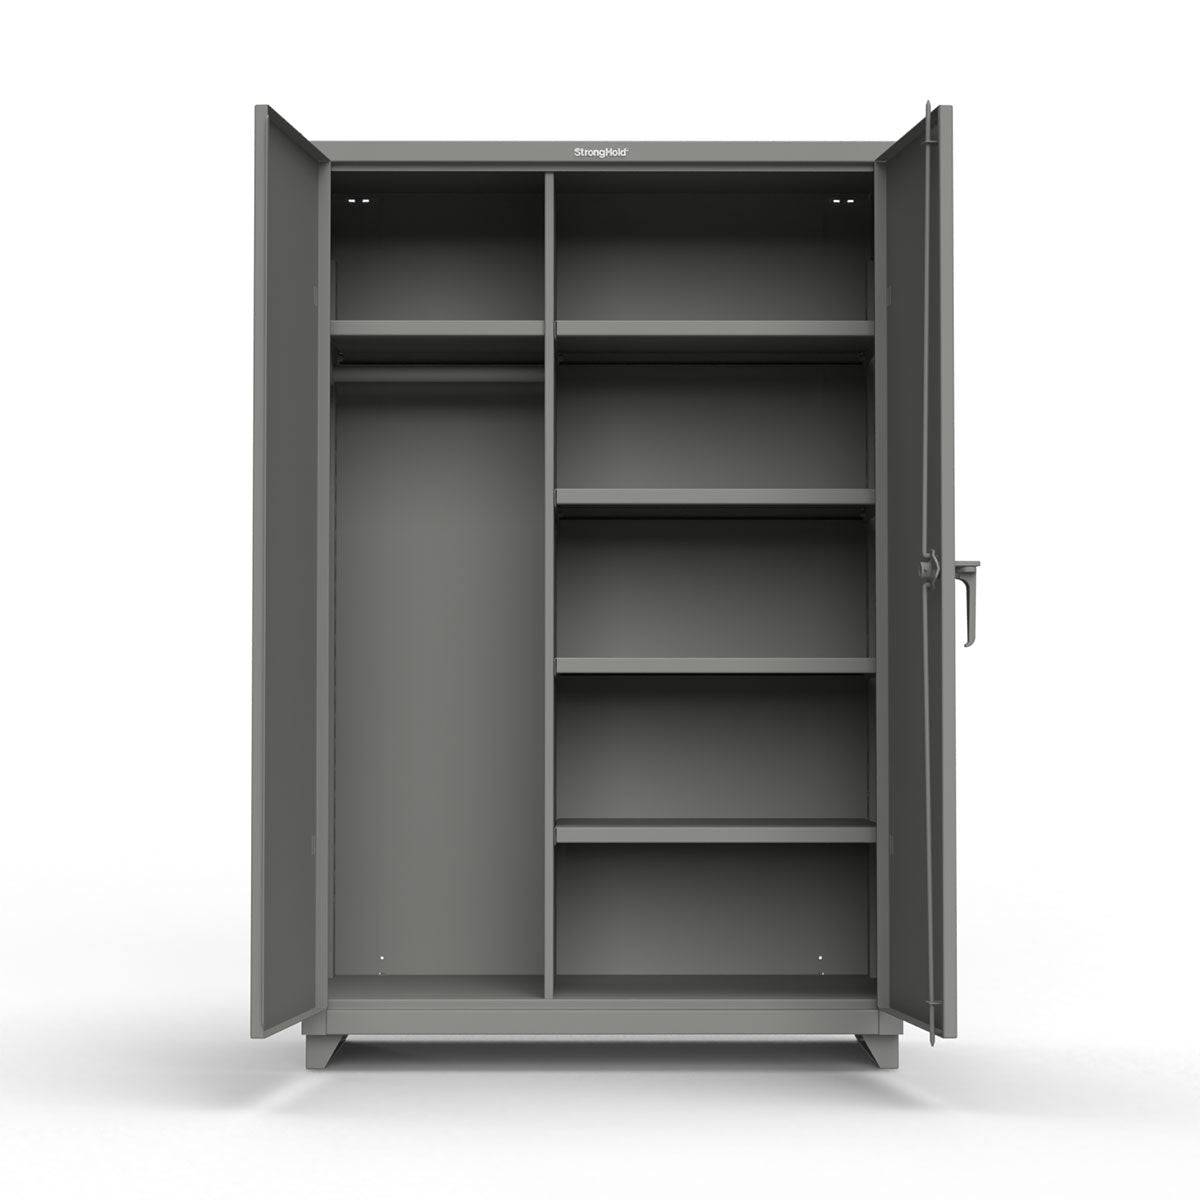 Extra Heavy Duty 14 GA Uniform Cabinet with 5 Shelves - 48 In. W x 24 In. D x 75 In. H - Strong Hold